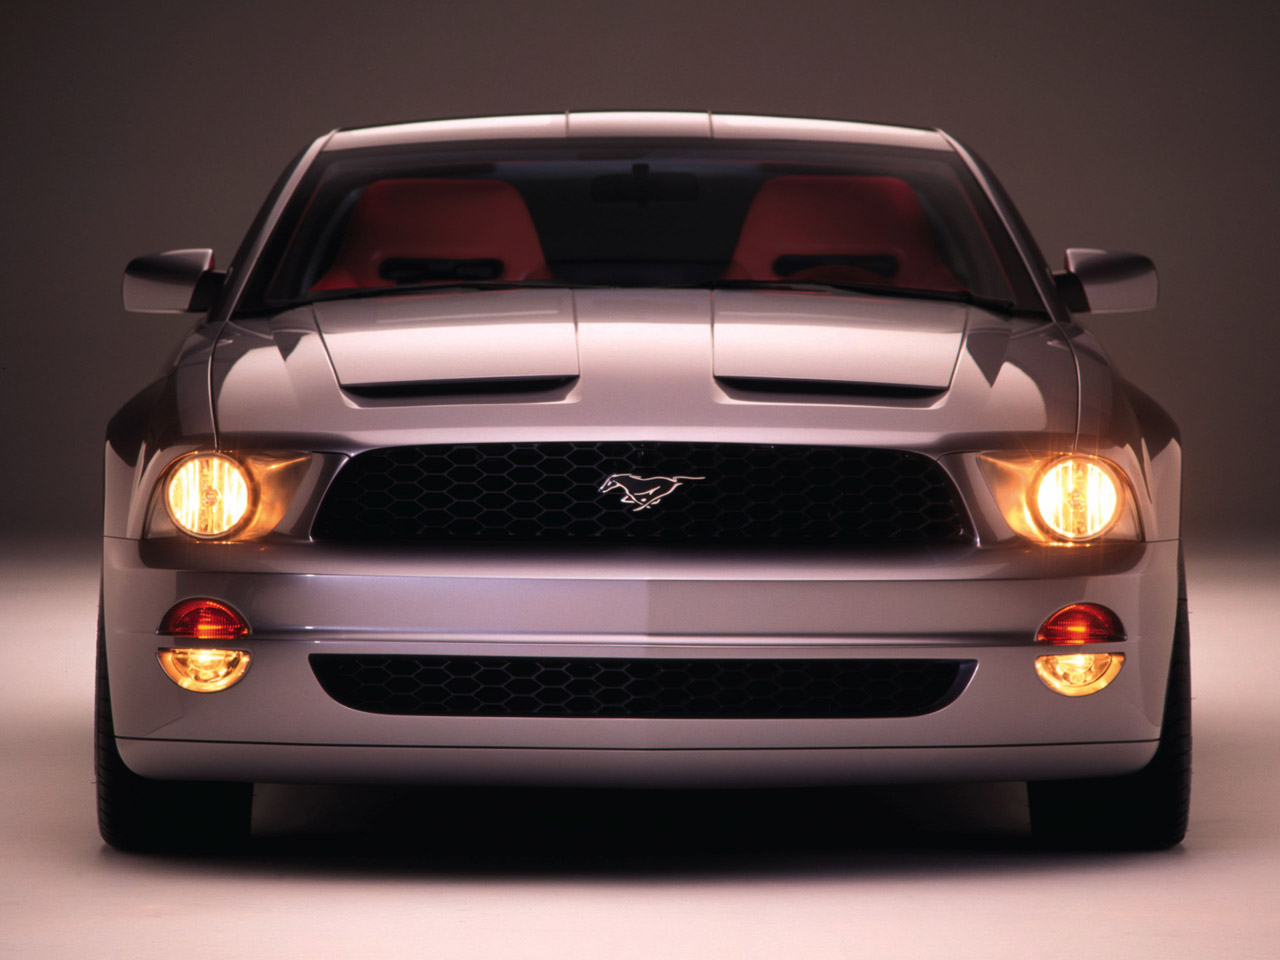 Ford Mustang HT coupe